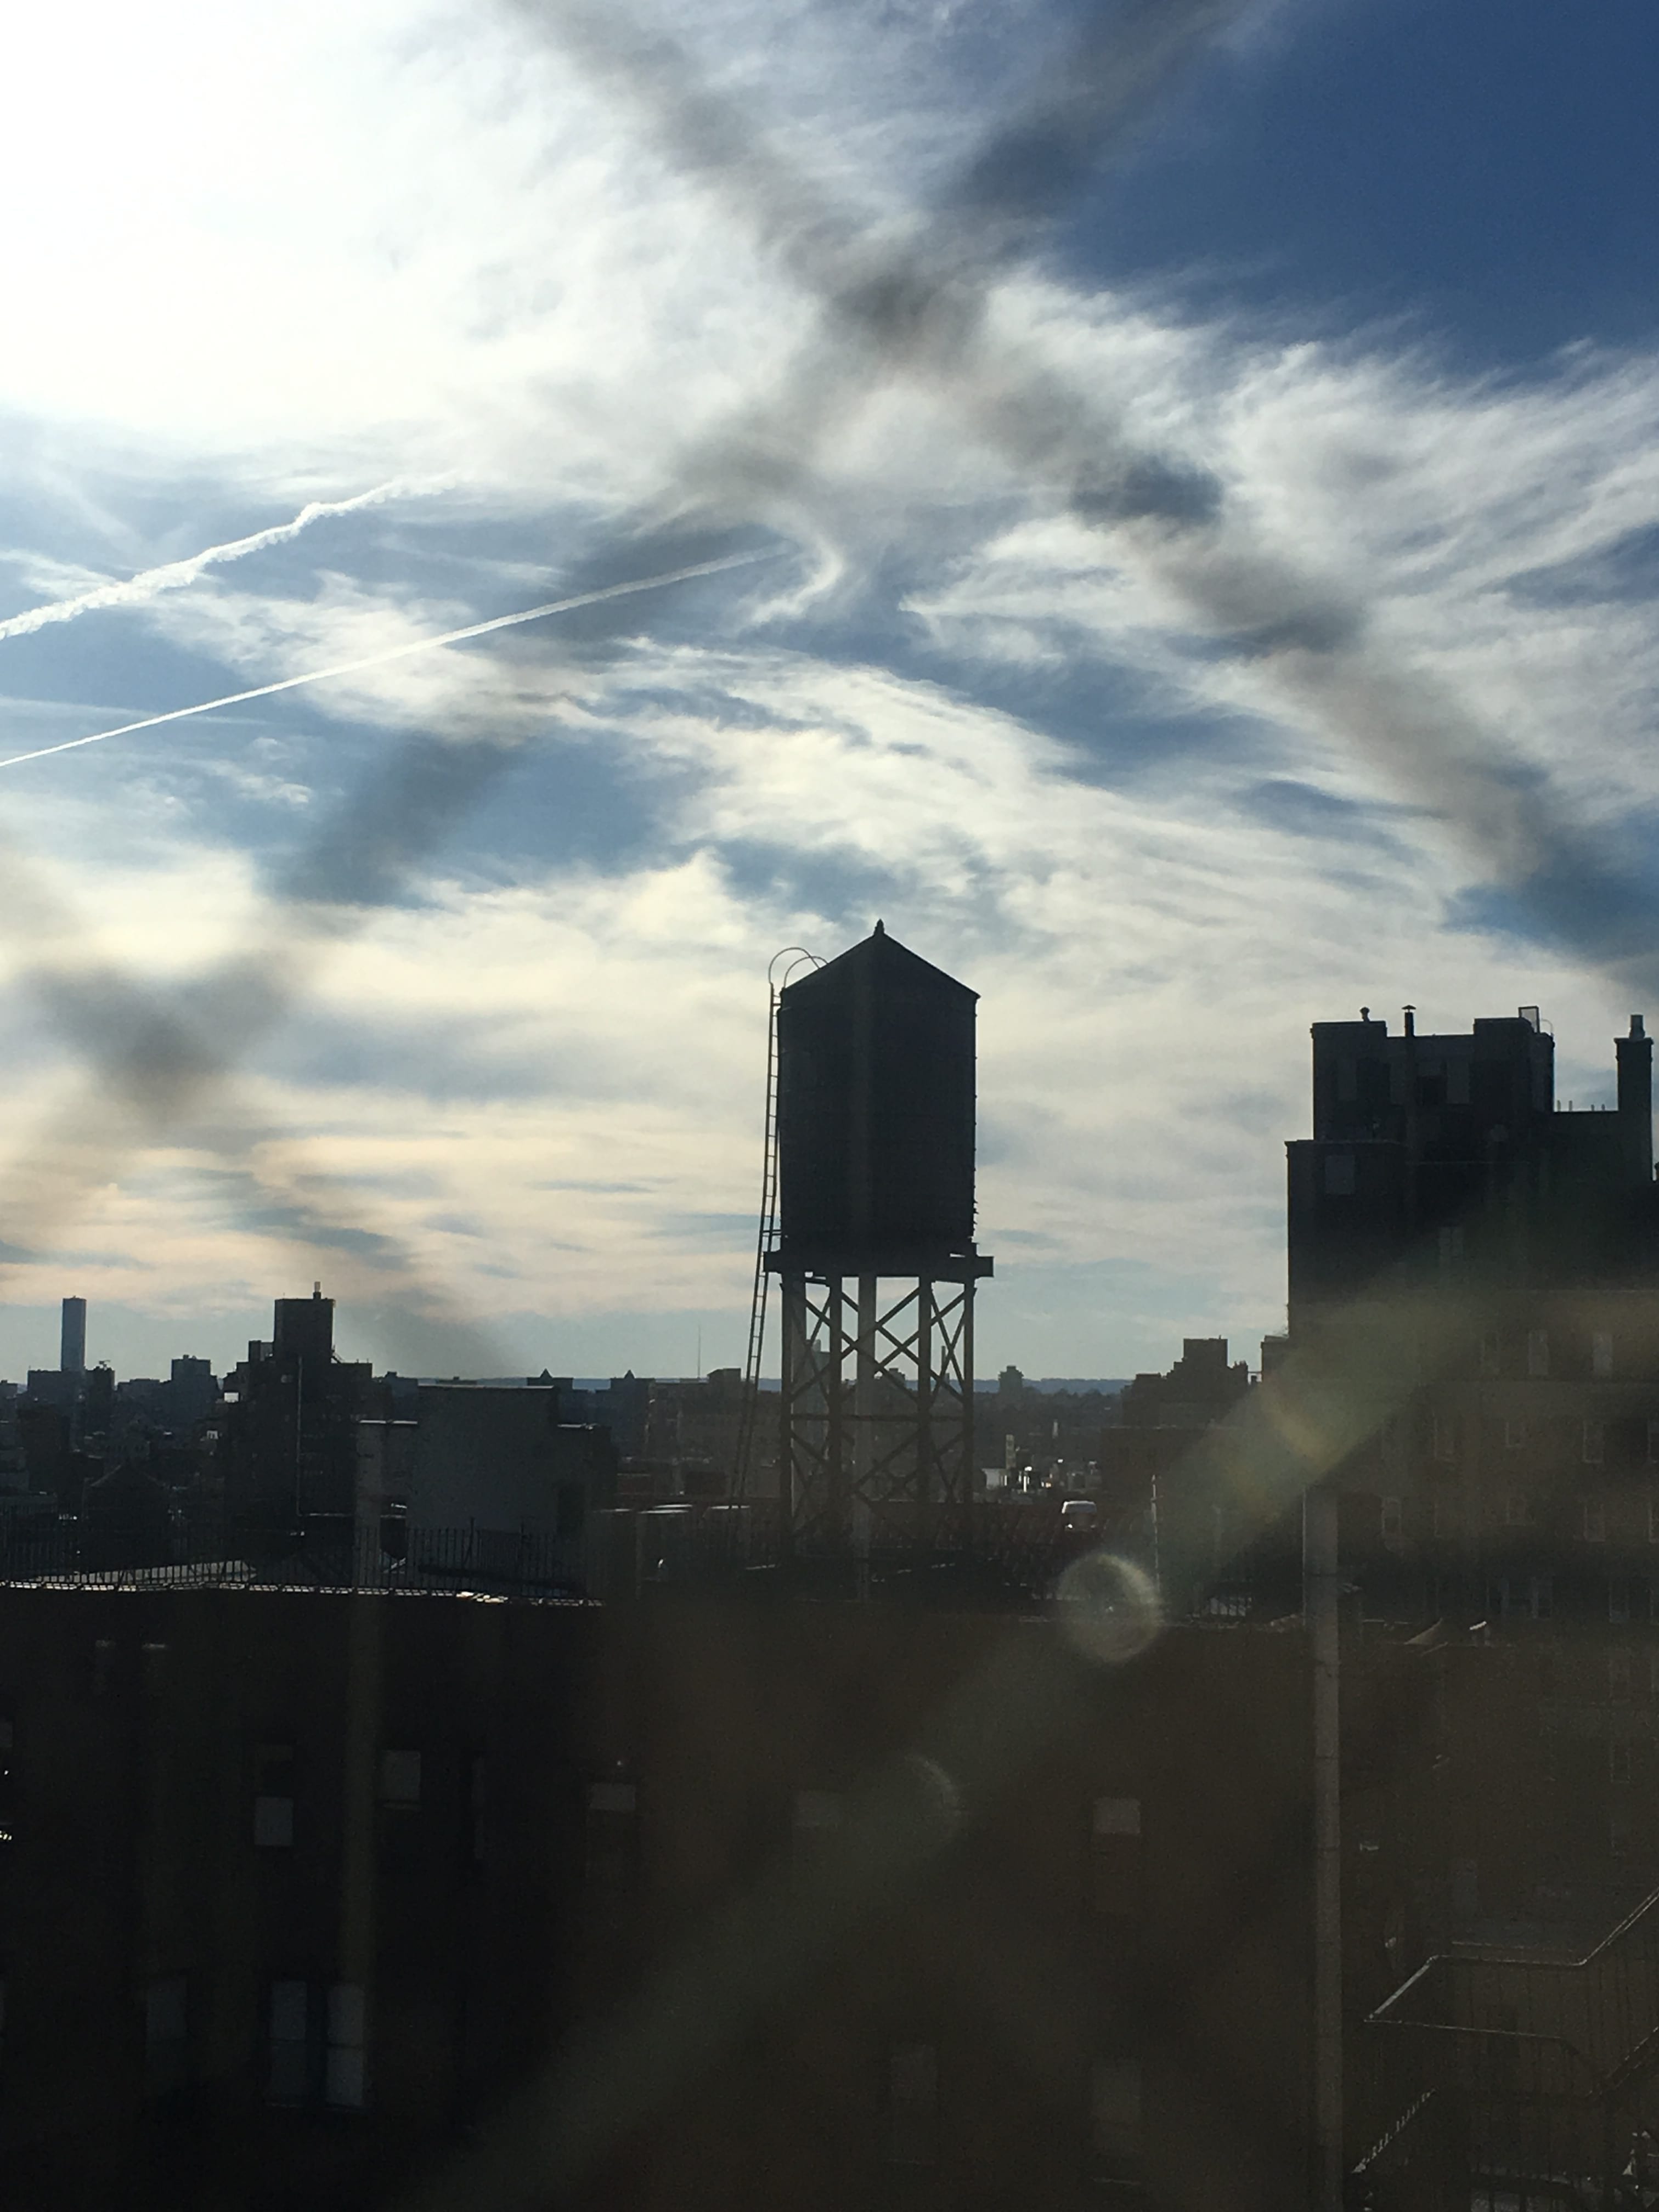 Design Idea 3 – The Water Tanks of NYC